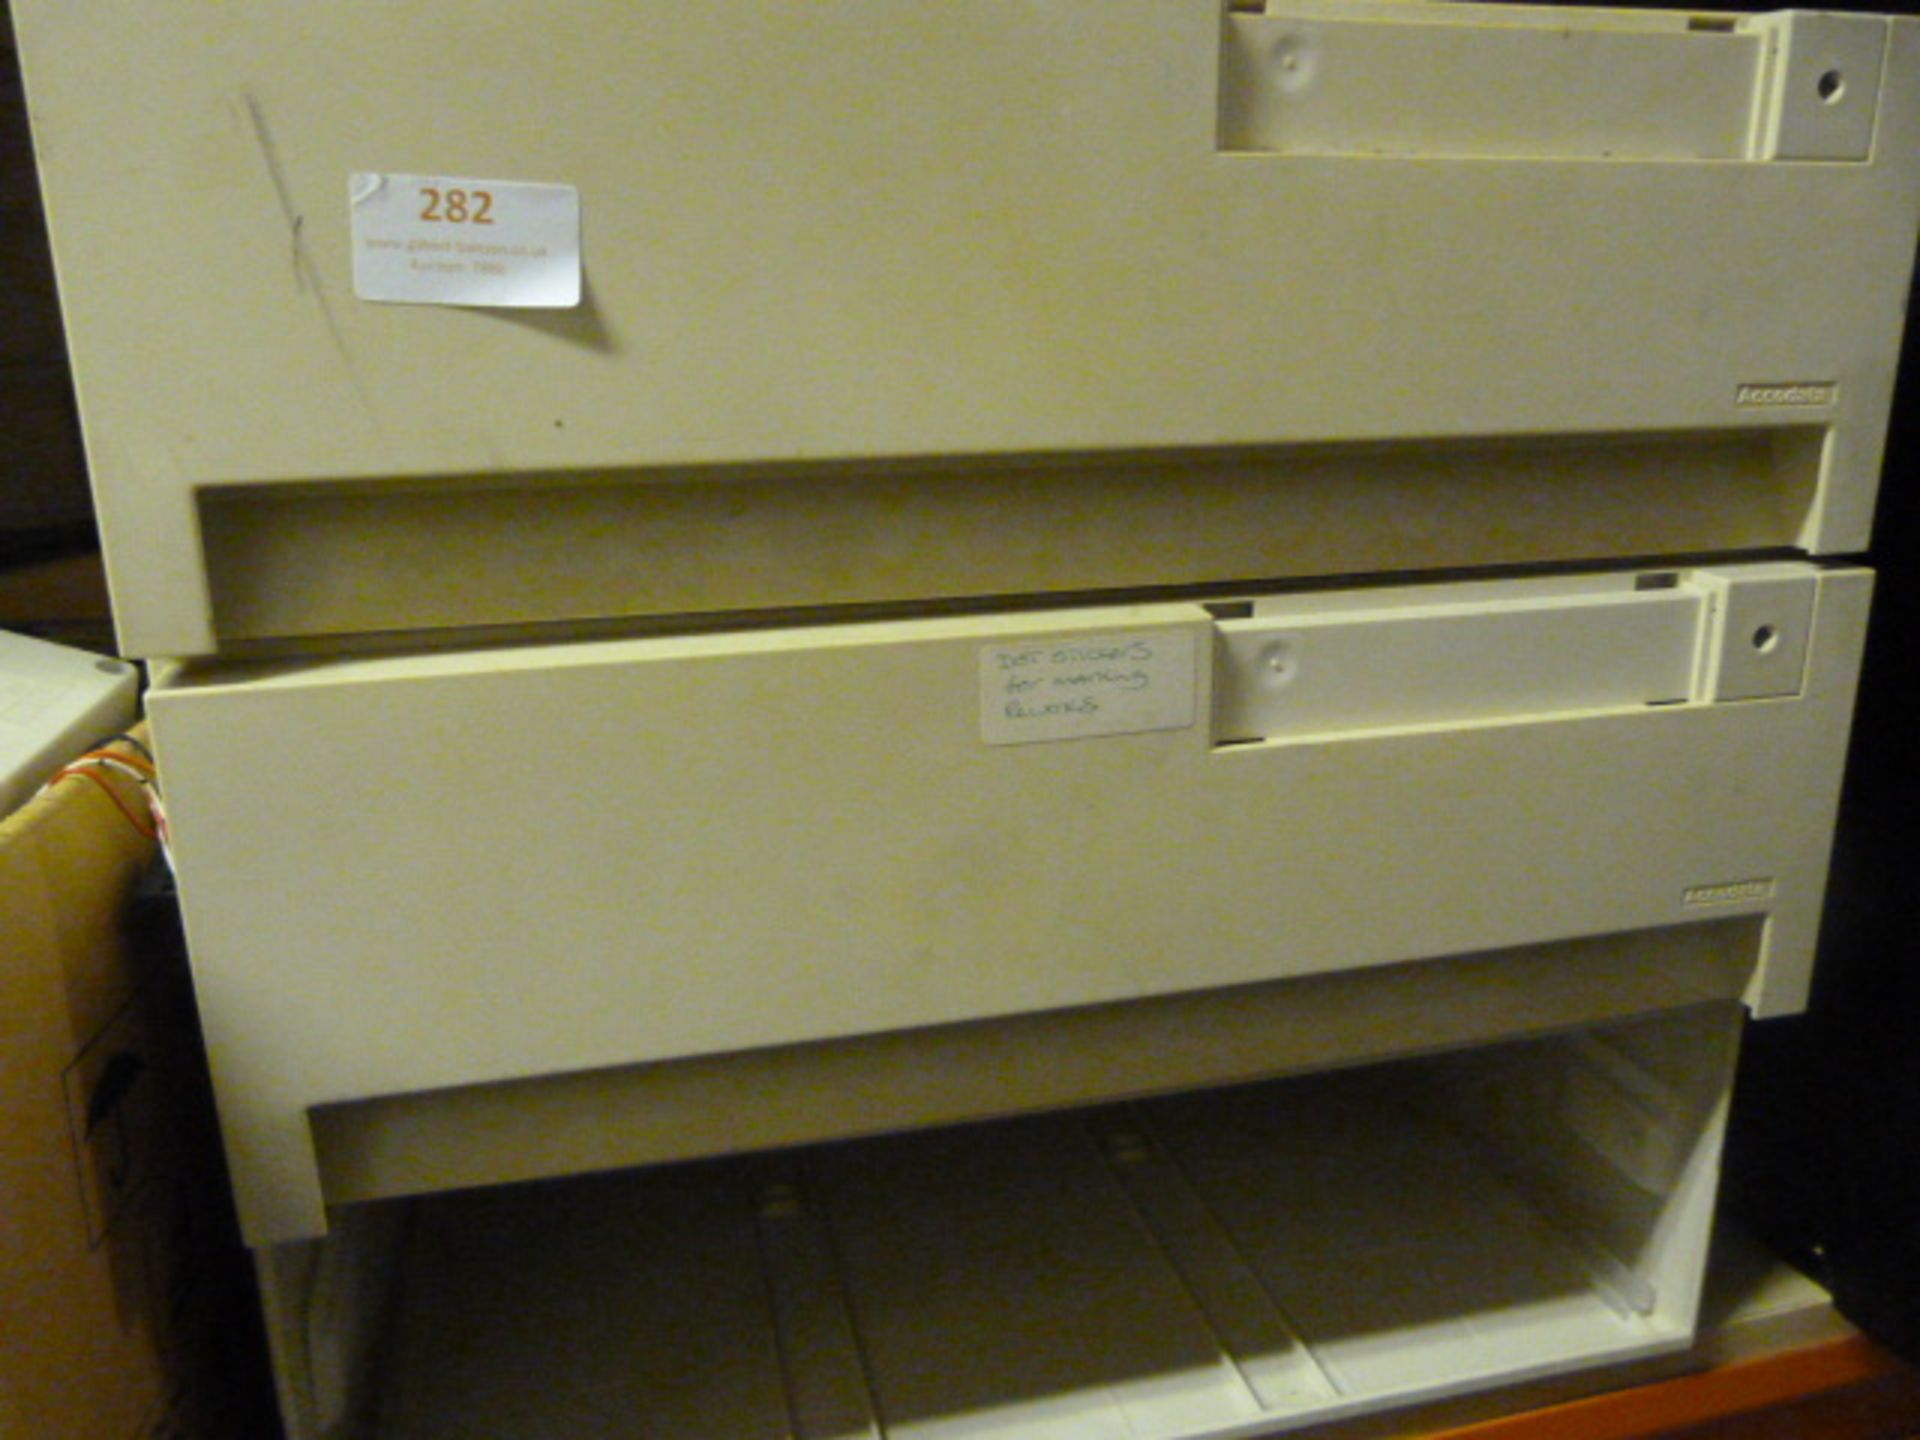 *Set of Two Drawers Containing Disc Chips